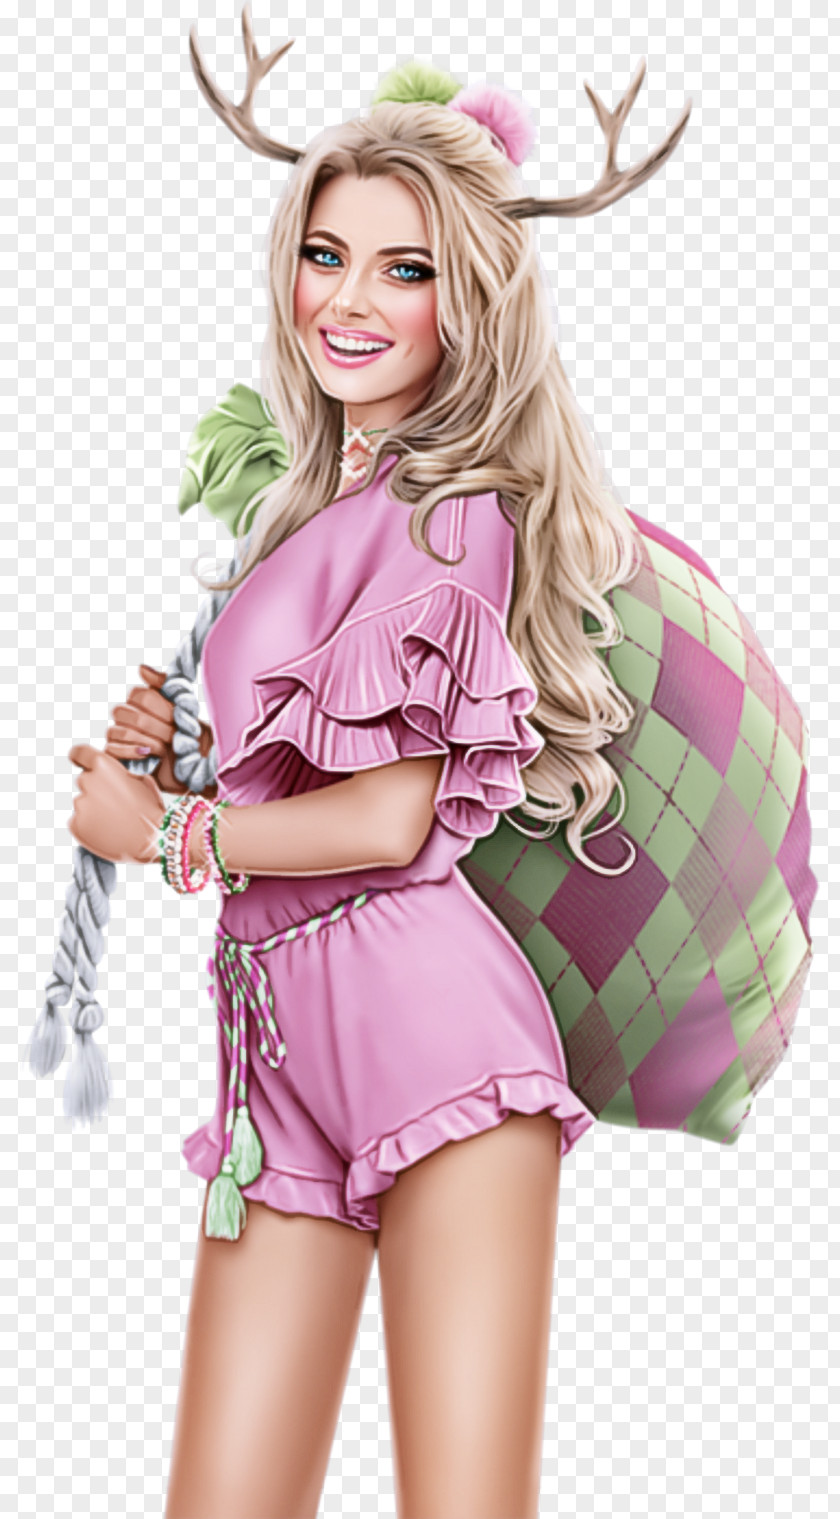 Clothing Pink Blond Shorts Costume PNG